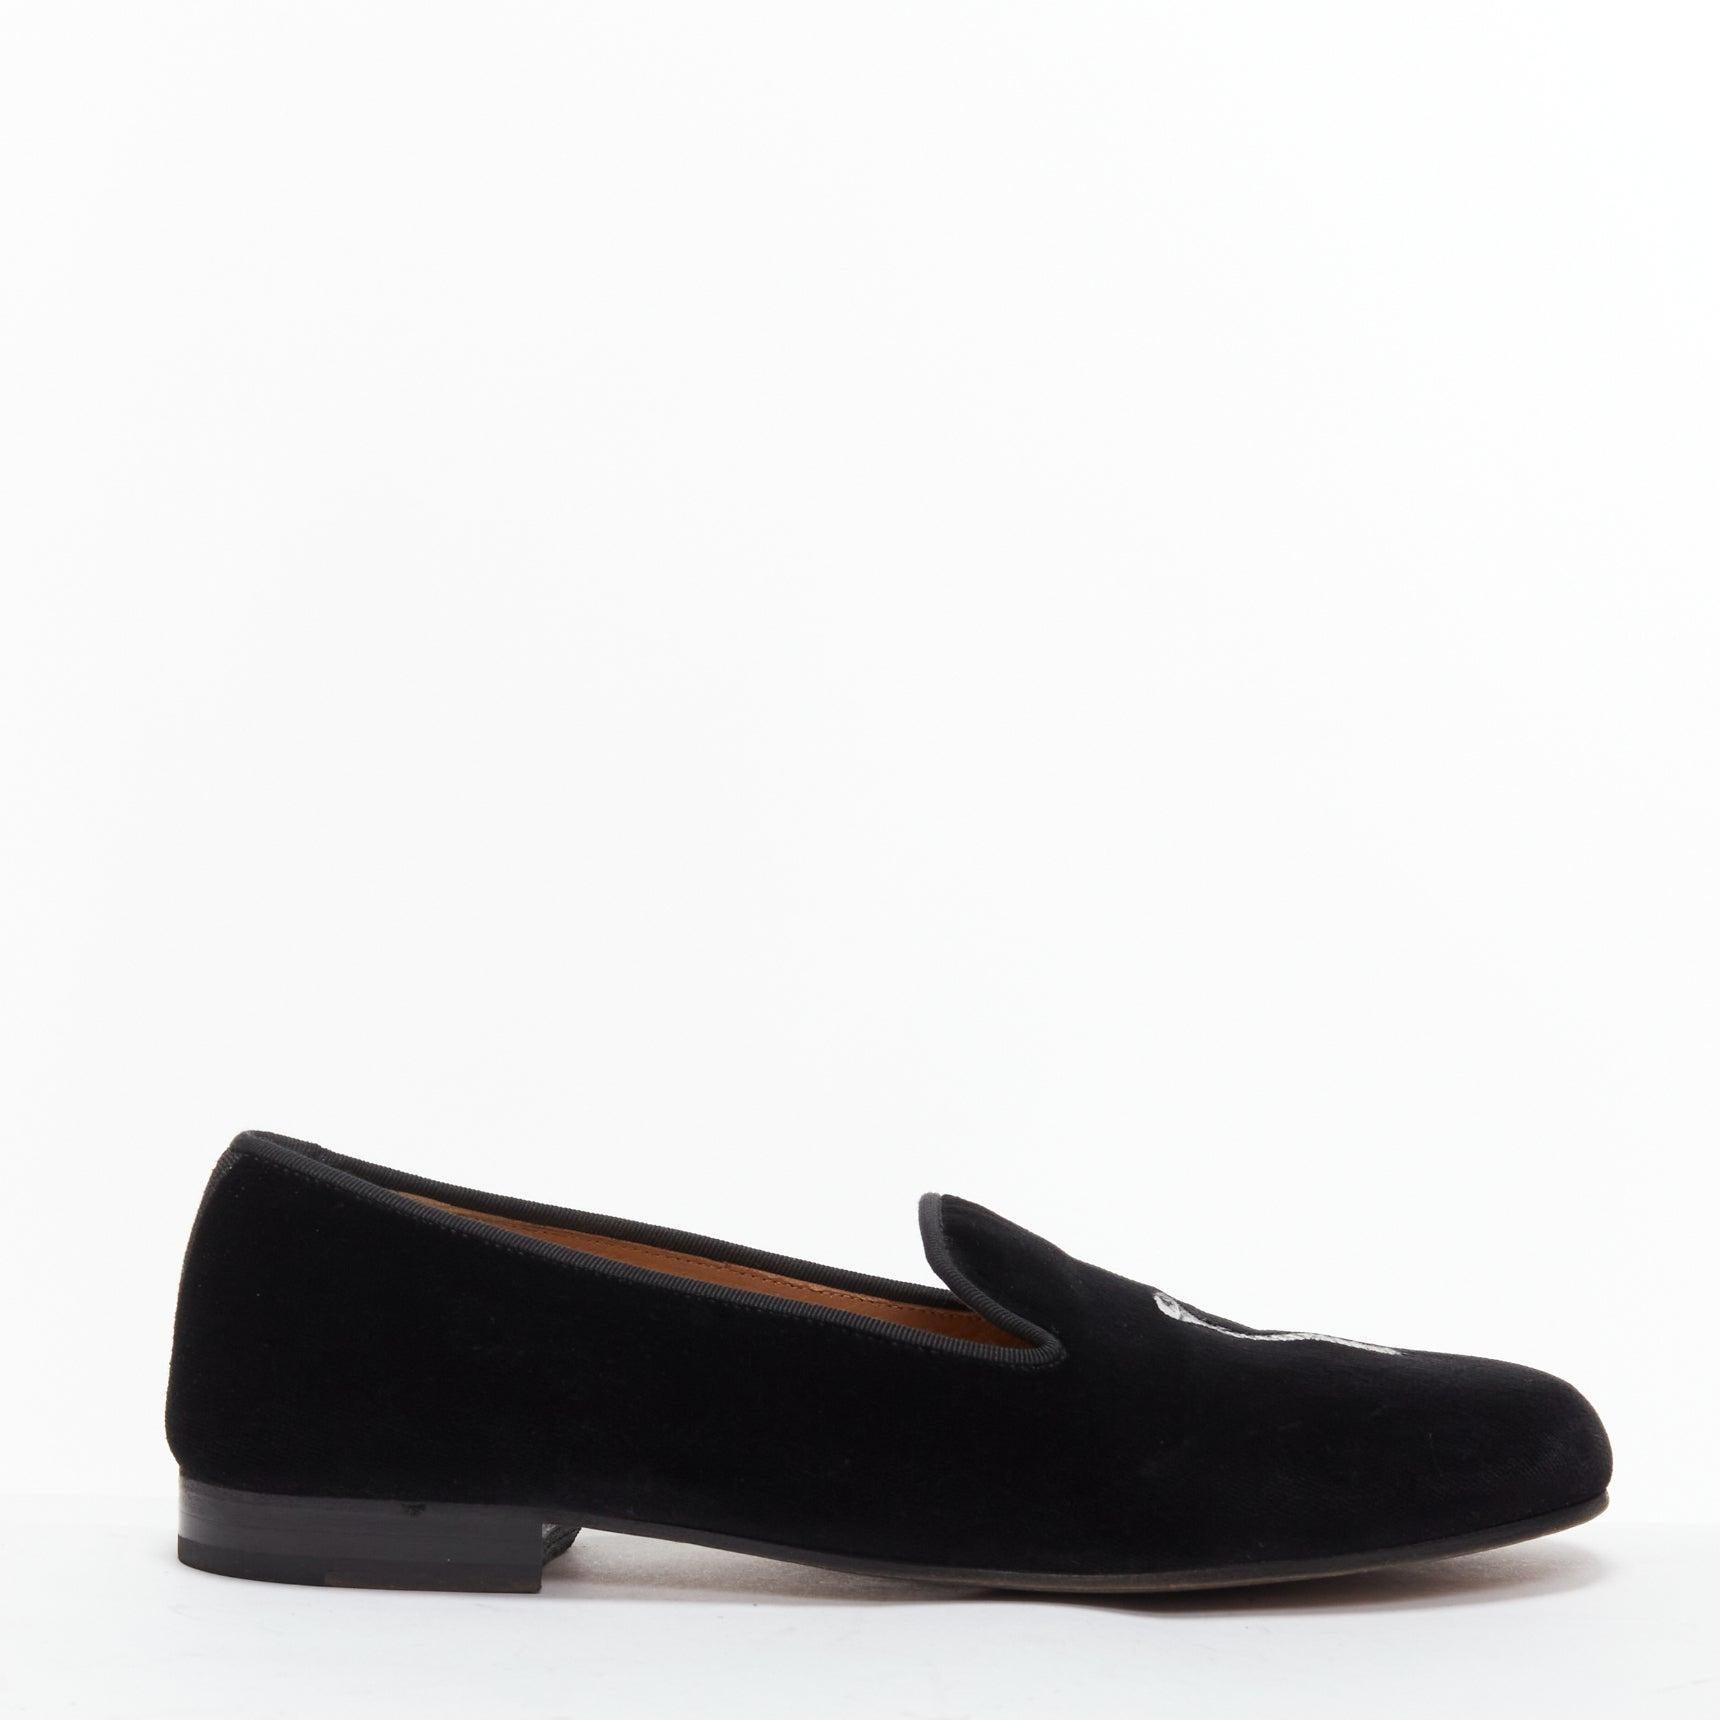 STUBBS WOOTTON College Screw You black velvet smoking slipper loafer US9 EU42
Reference: JSLE/A00096
Brand: Stubbs Wootton
Model: College
Material: Velvet, Leather
Color: Black, Red
Pattern: Solid
Closure: Slip On
Lining: Nude Leather
Made in: